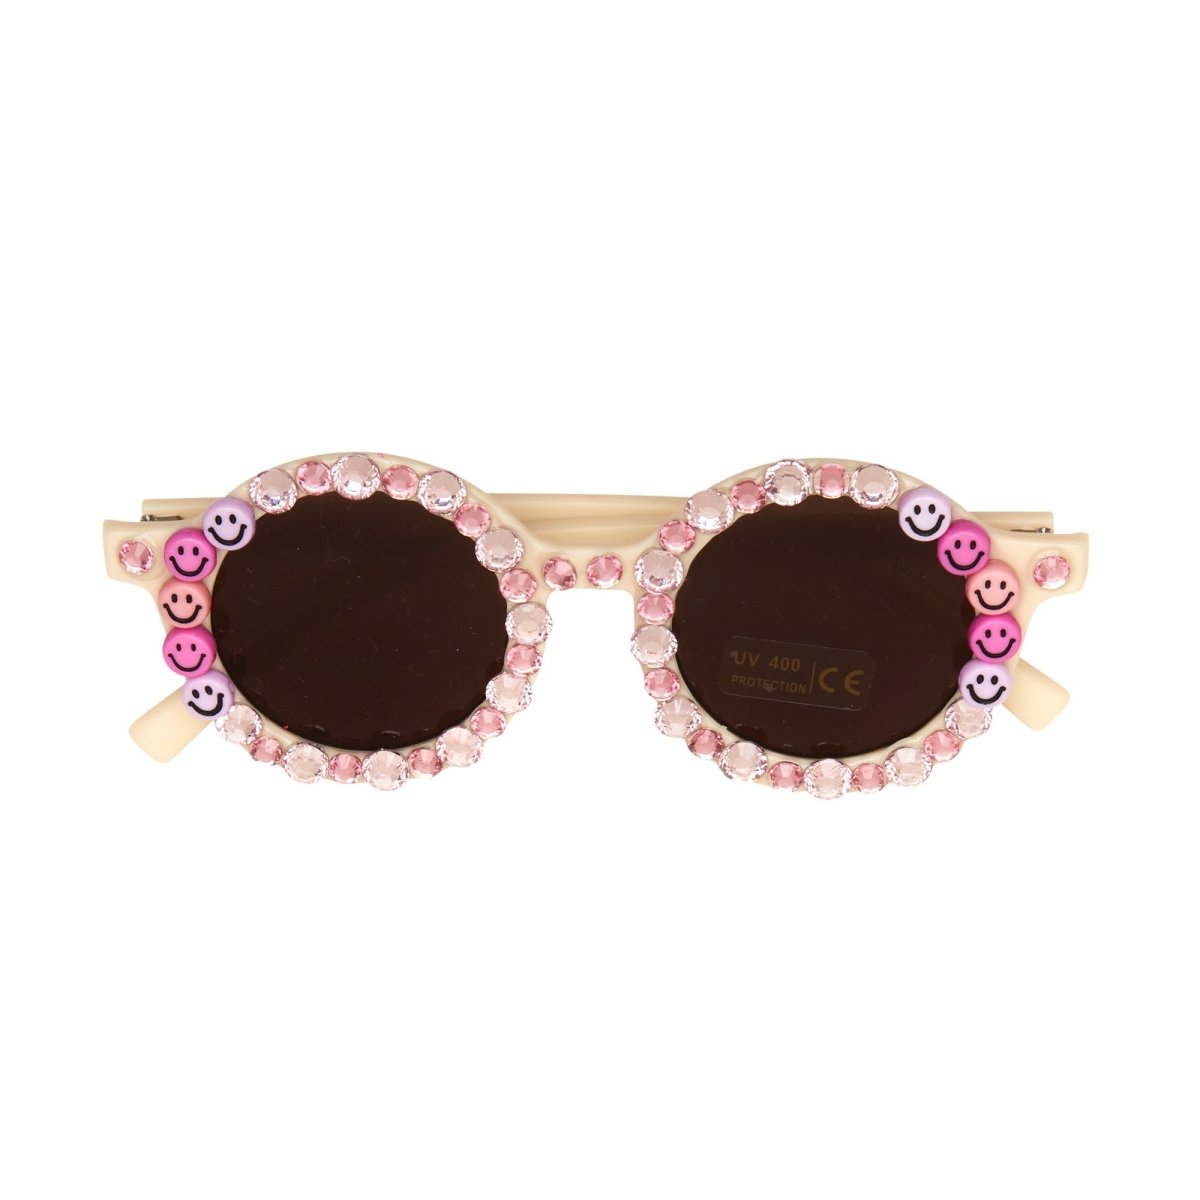 SMILEY FACE SUNGLASSES - STRAND UP